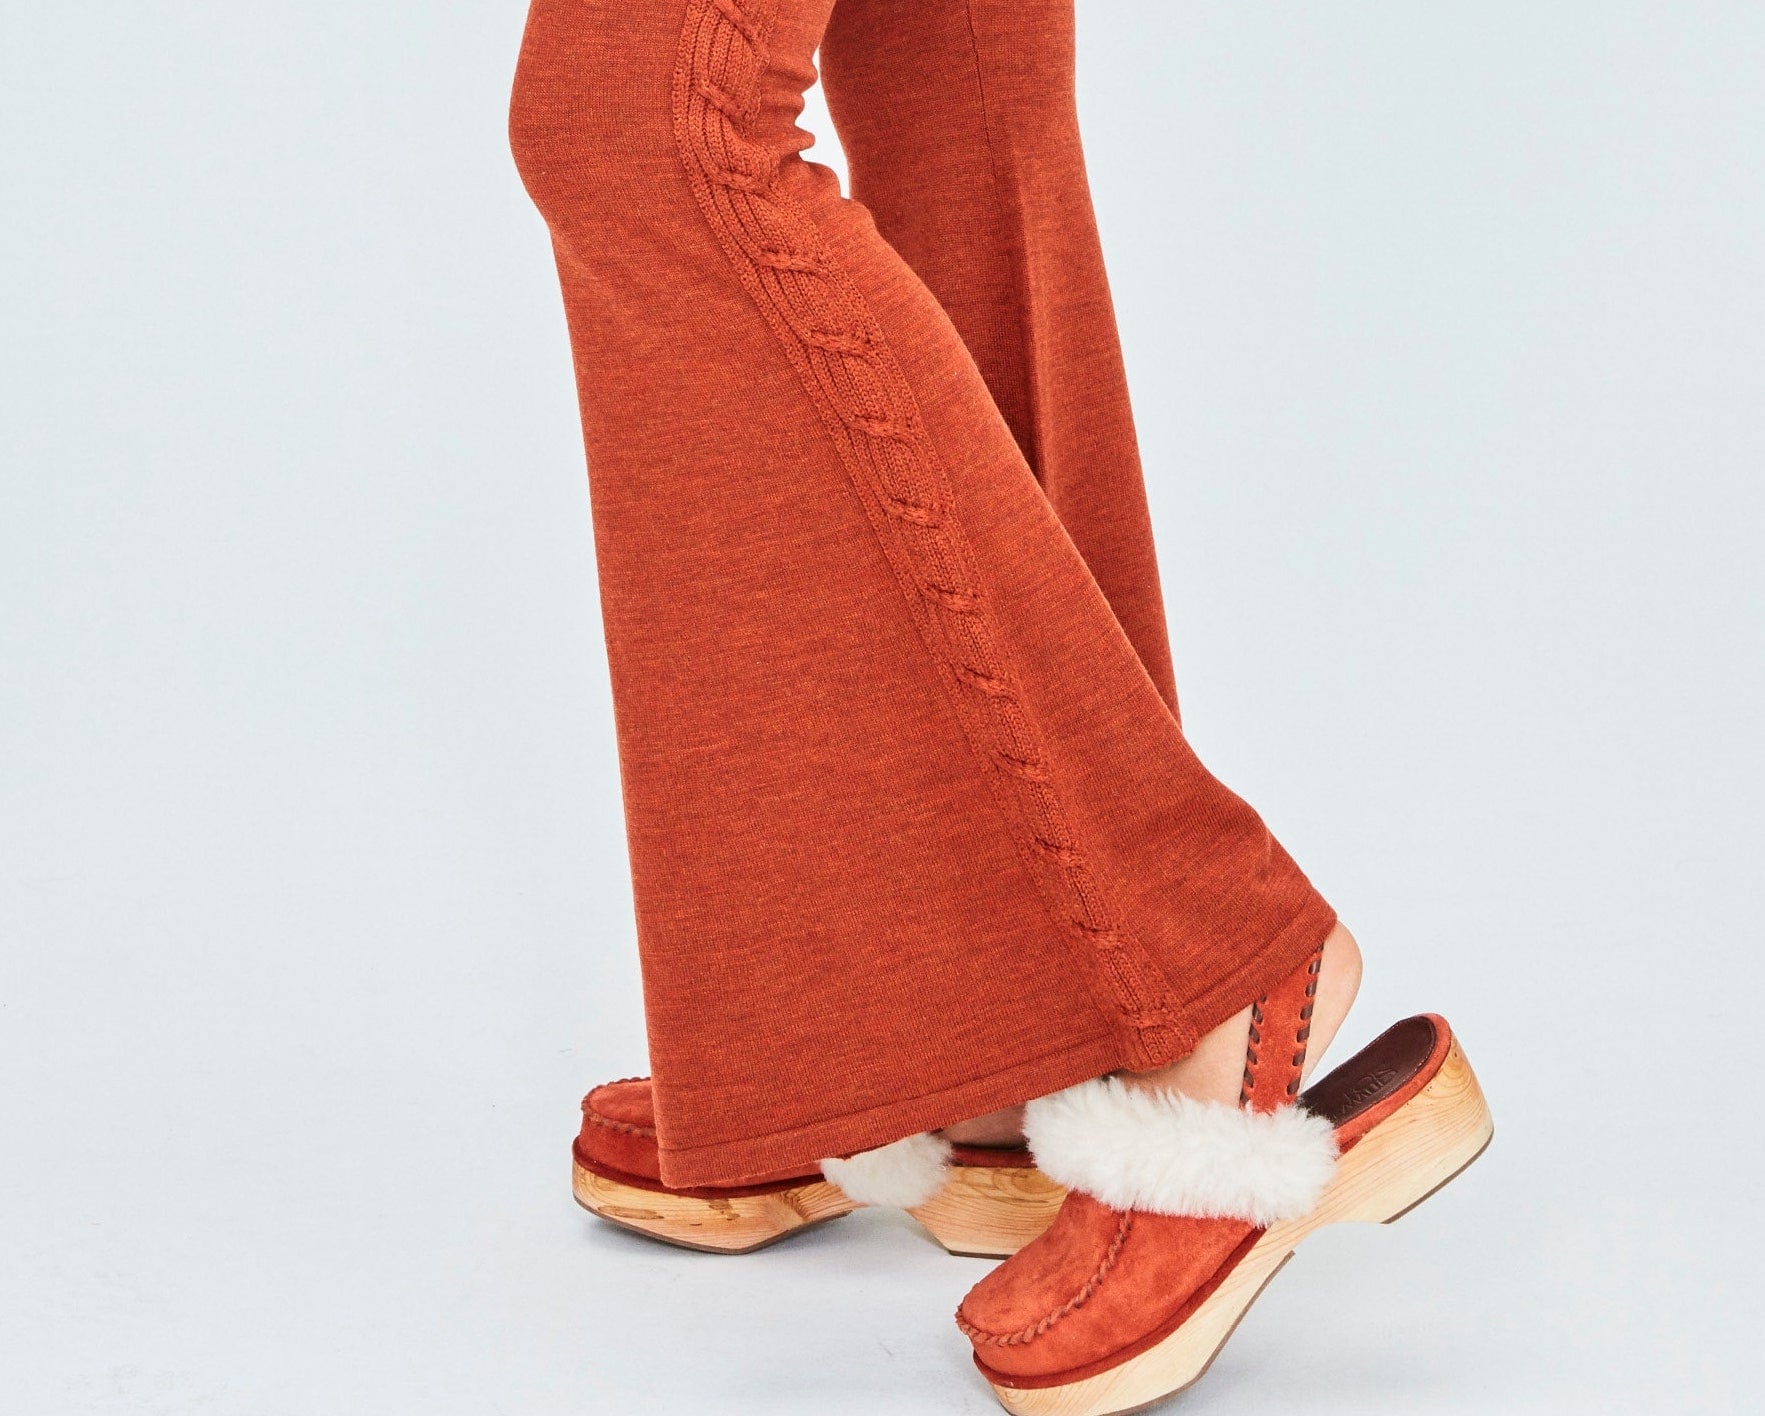 The Clog Trend Is Back for 2021, and I'm Not Mad About It